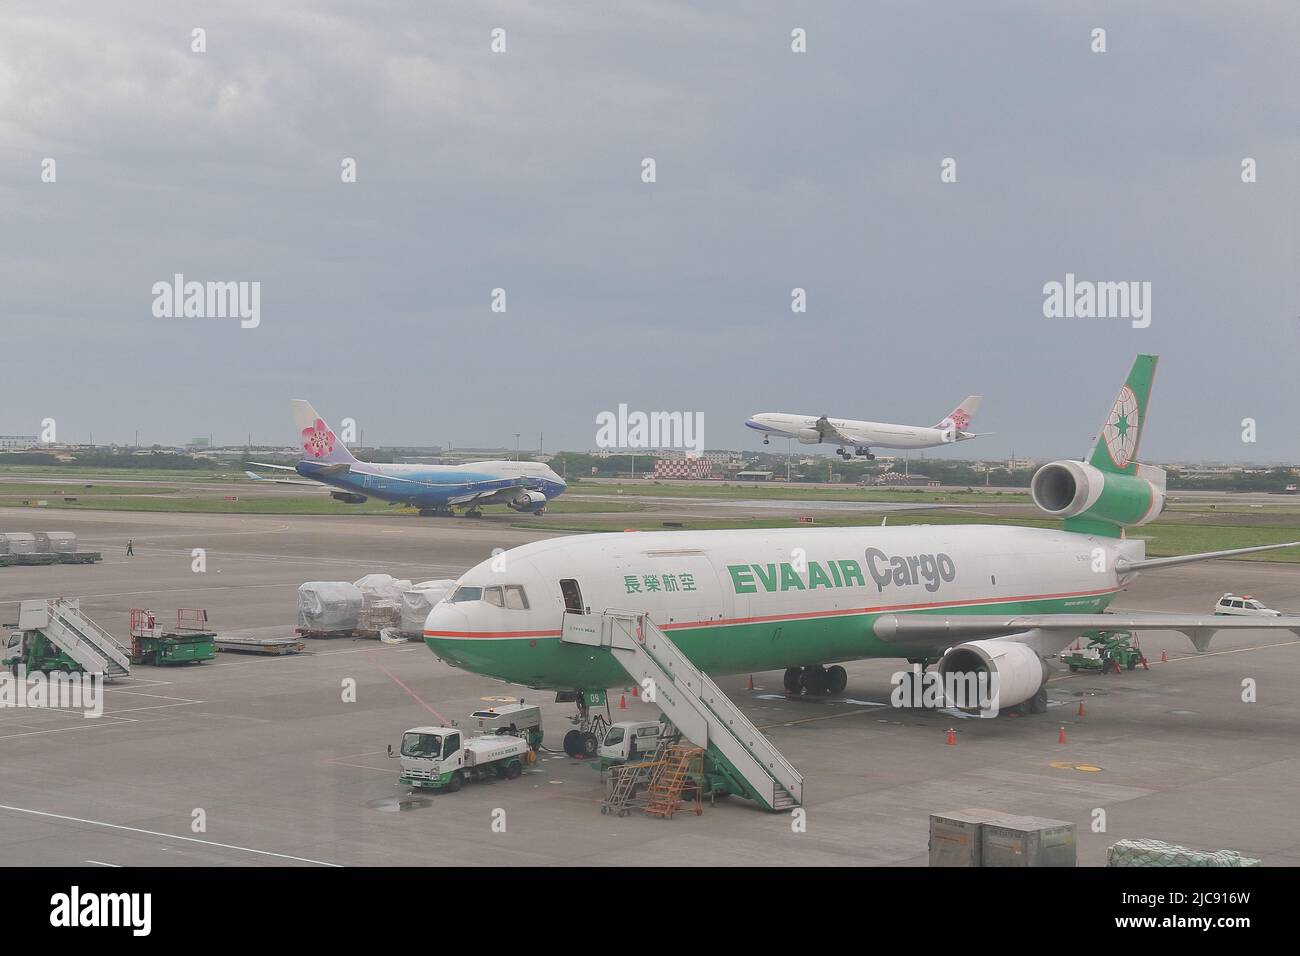 Eva Air Cargo McDonnell Douglas MD-11F B-16109 and other airplanes at the Taoyuan International Airport (TPE), Taiwan Stock Photo